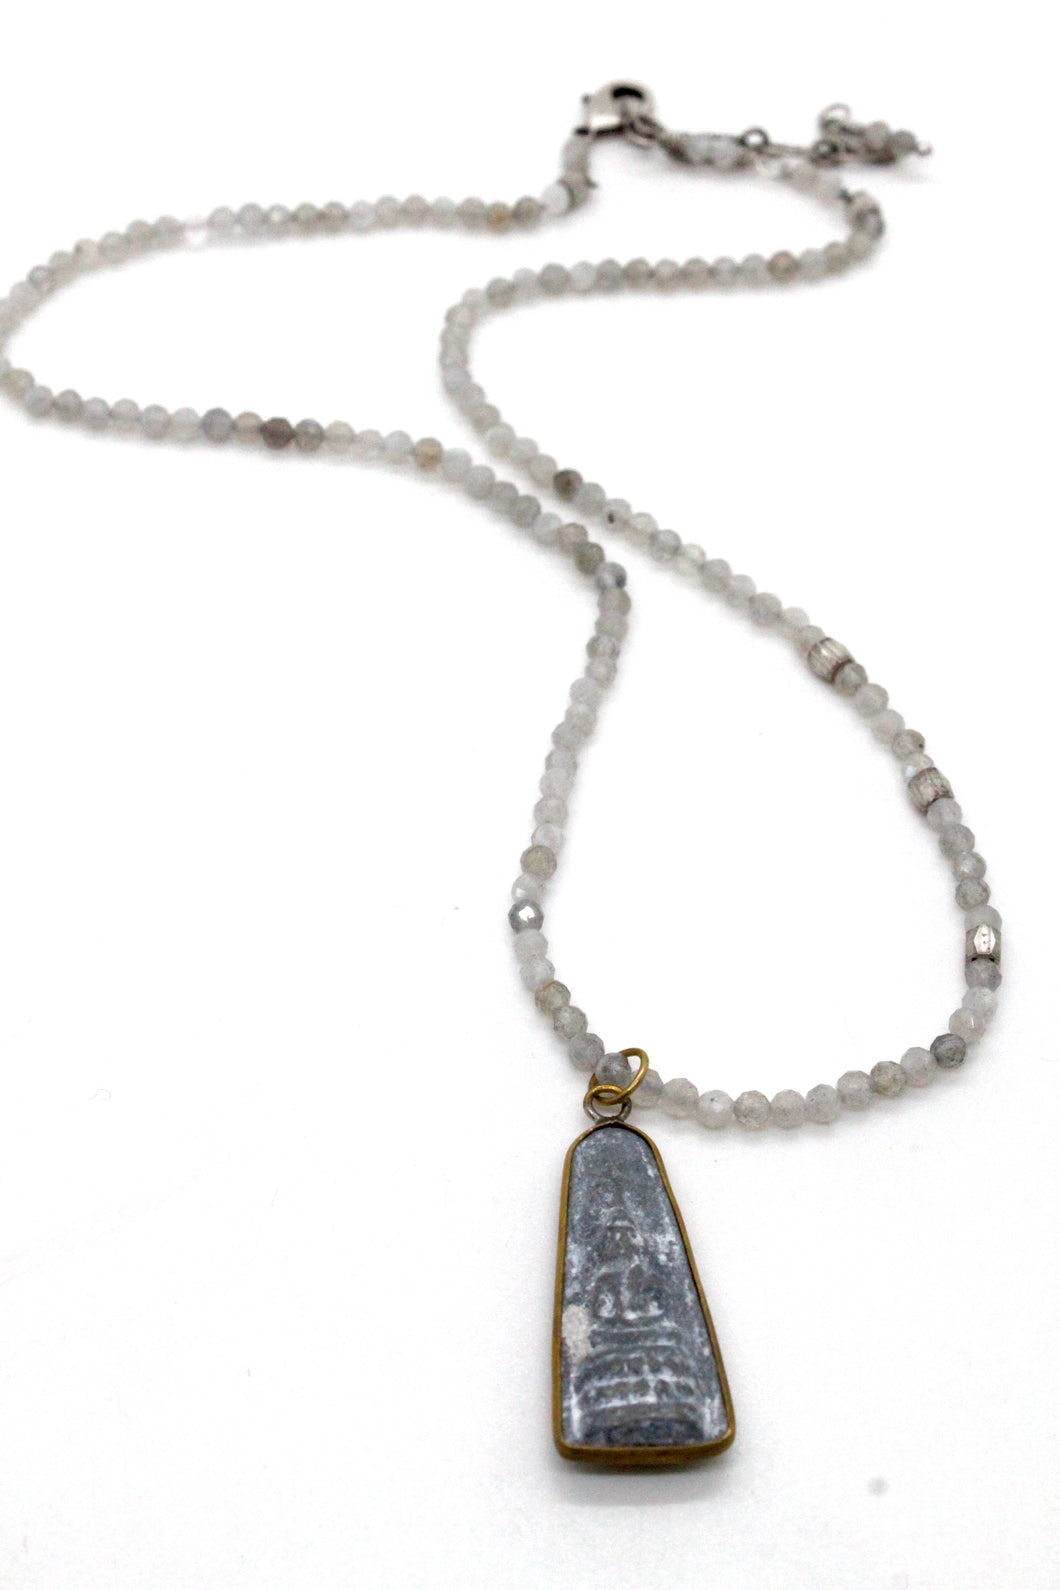 Faceted Labradorite Short Necklace with Antique Wrapped Buddha Charm NS-LA2-AWB3 -The Buddha Collection-